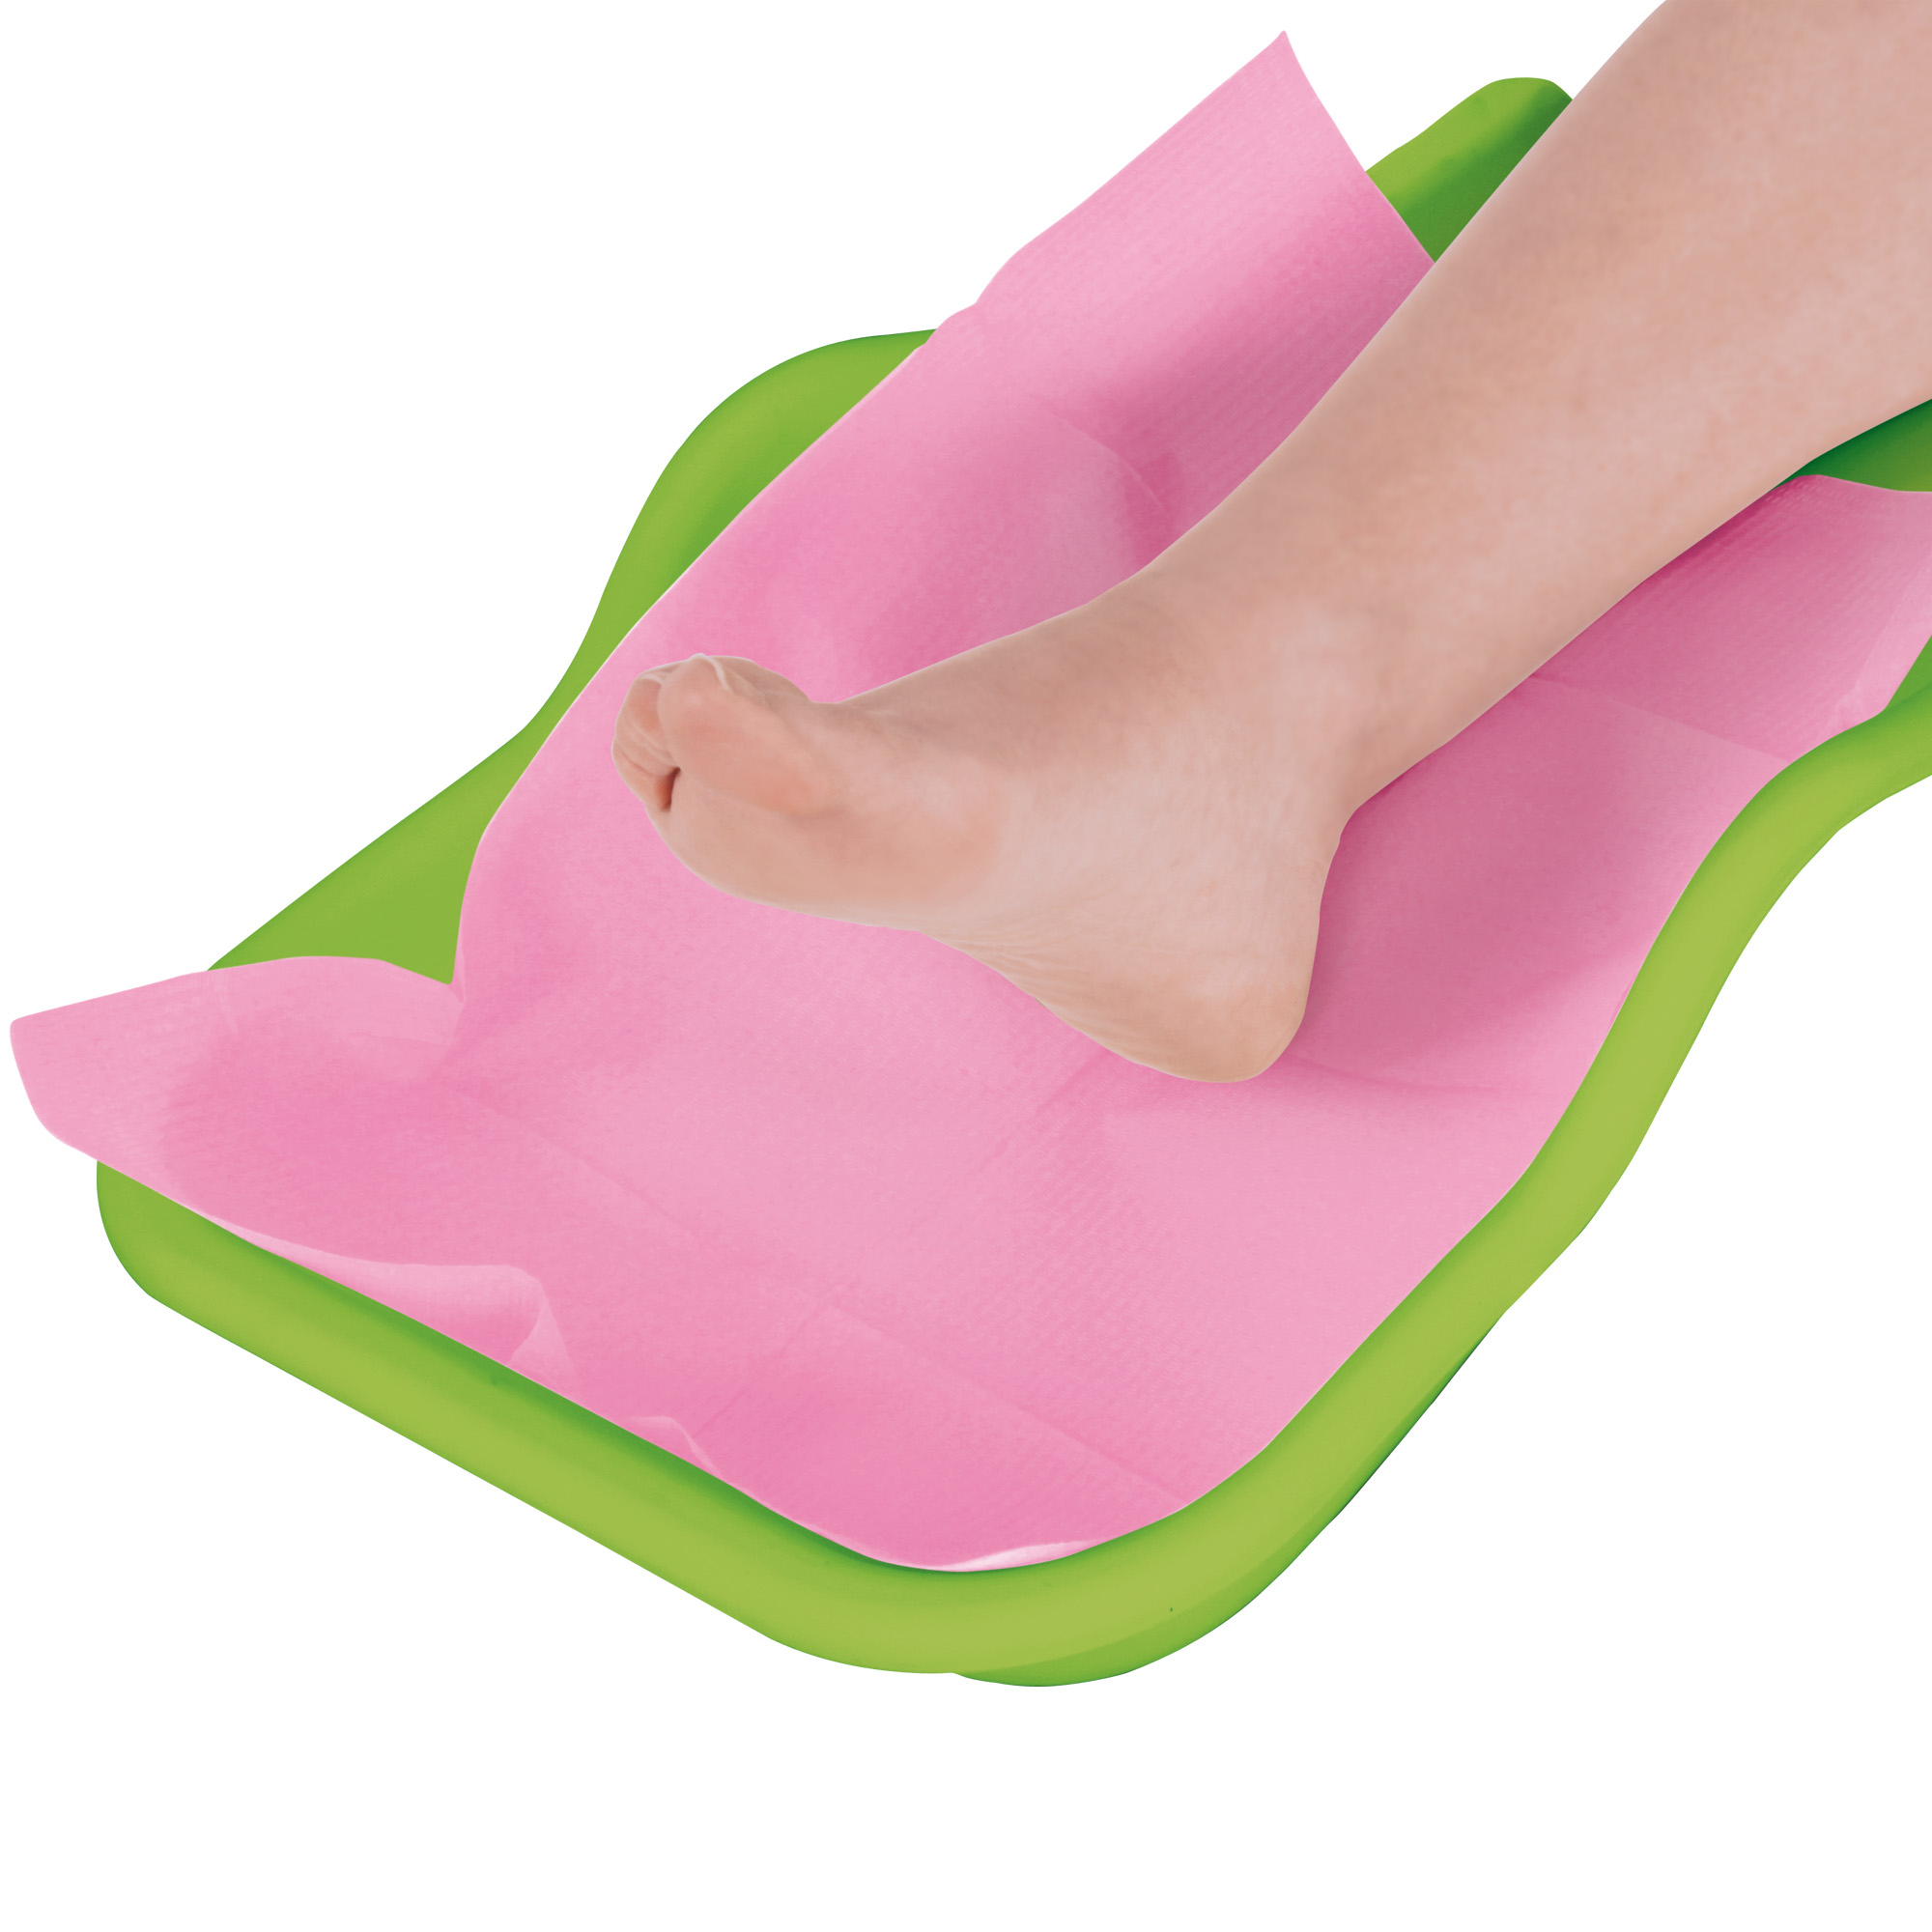 Flexible tray for the collection of pedicure residues on the foot lime green